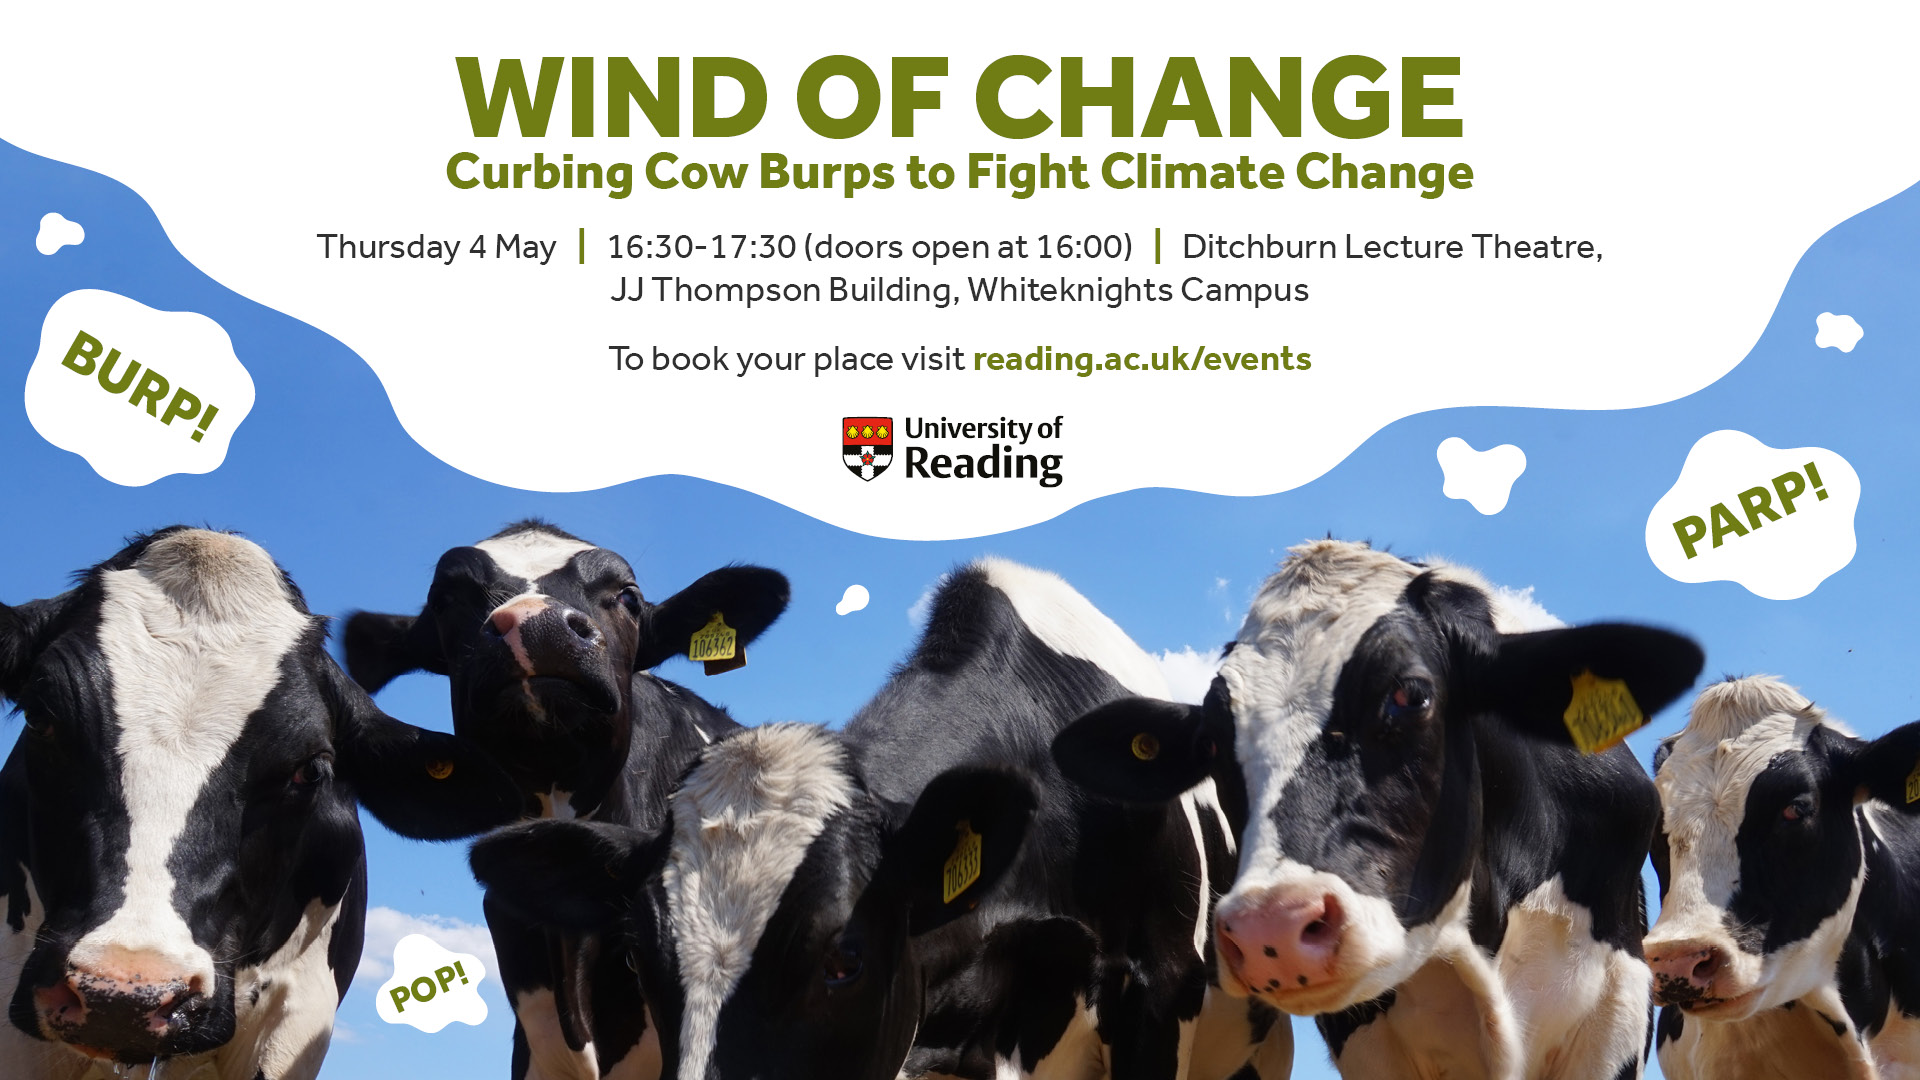 Wind of Change: Curbing cow burps to fight climate change. Thursday 4 May, 16:30-17:30, Ditchburn Lecture Theatre, JJ Thompson Building, Whiteknights Campus, University of Reading. An image of five cows in a field.